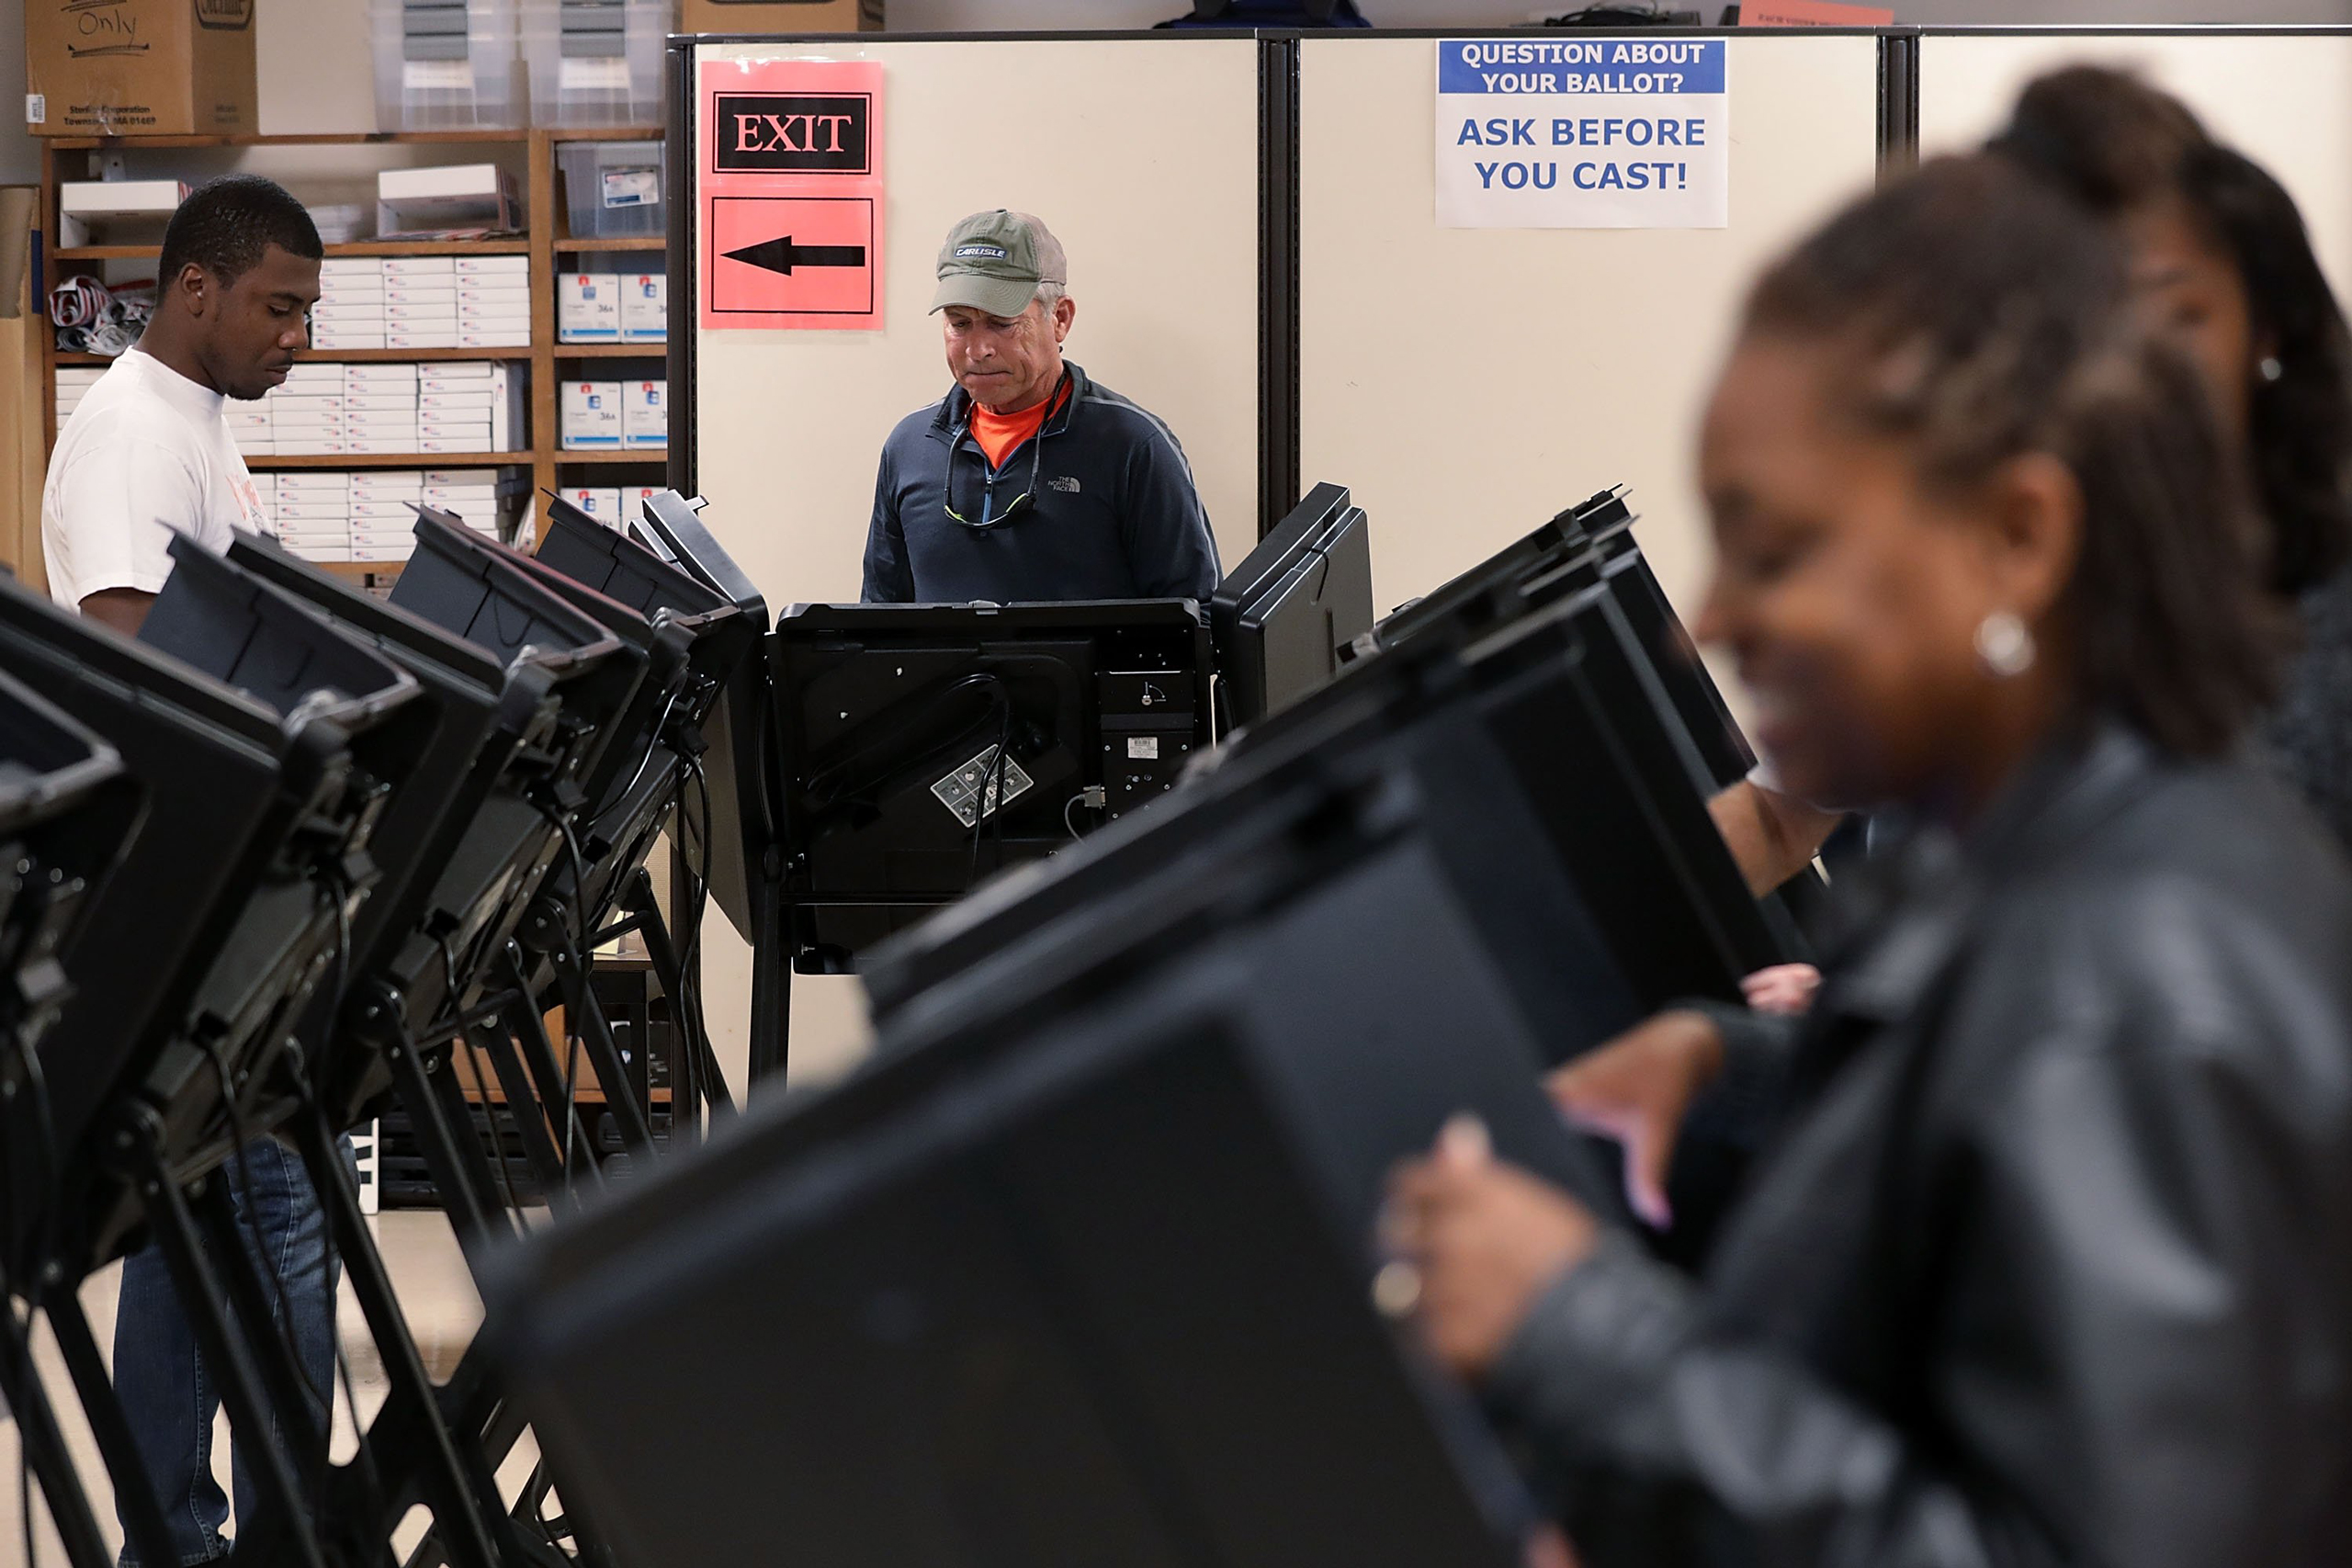 Voters cast their ballots during early voting for the 2016 general election at Forsyth County Government Center in Winston-Salem, N.C., on Oct. 28, 2016. (Alex Wong—Getty Images)